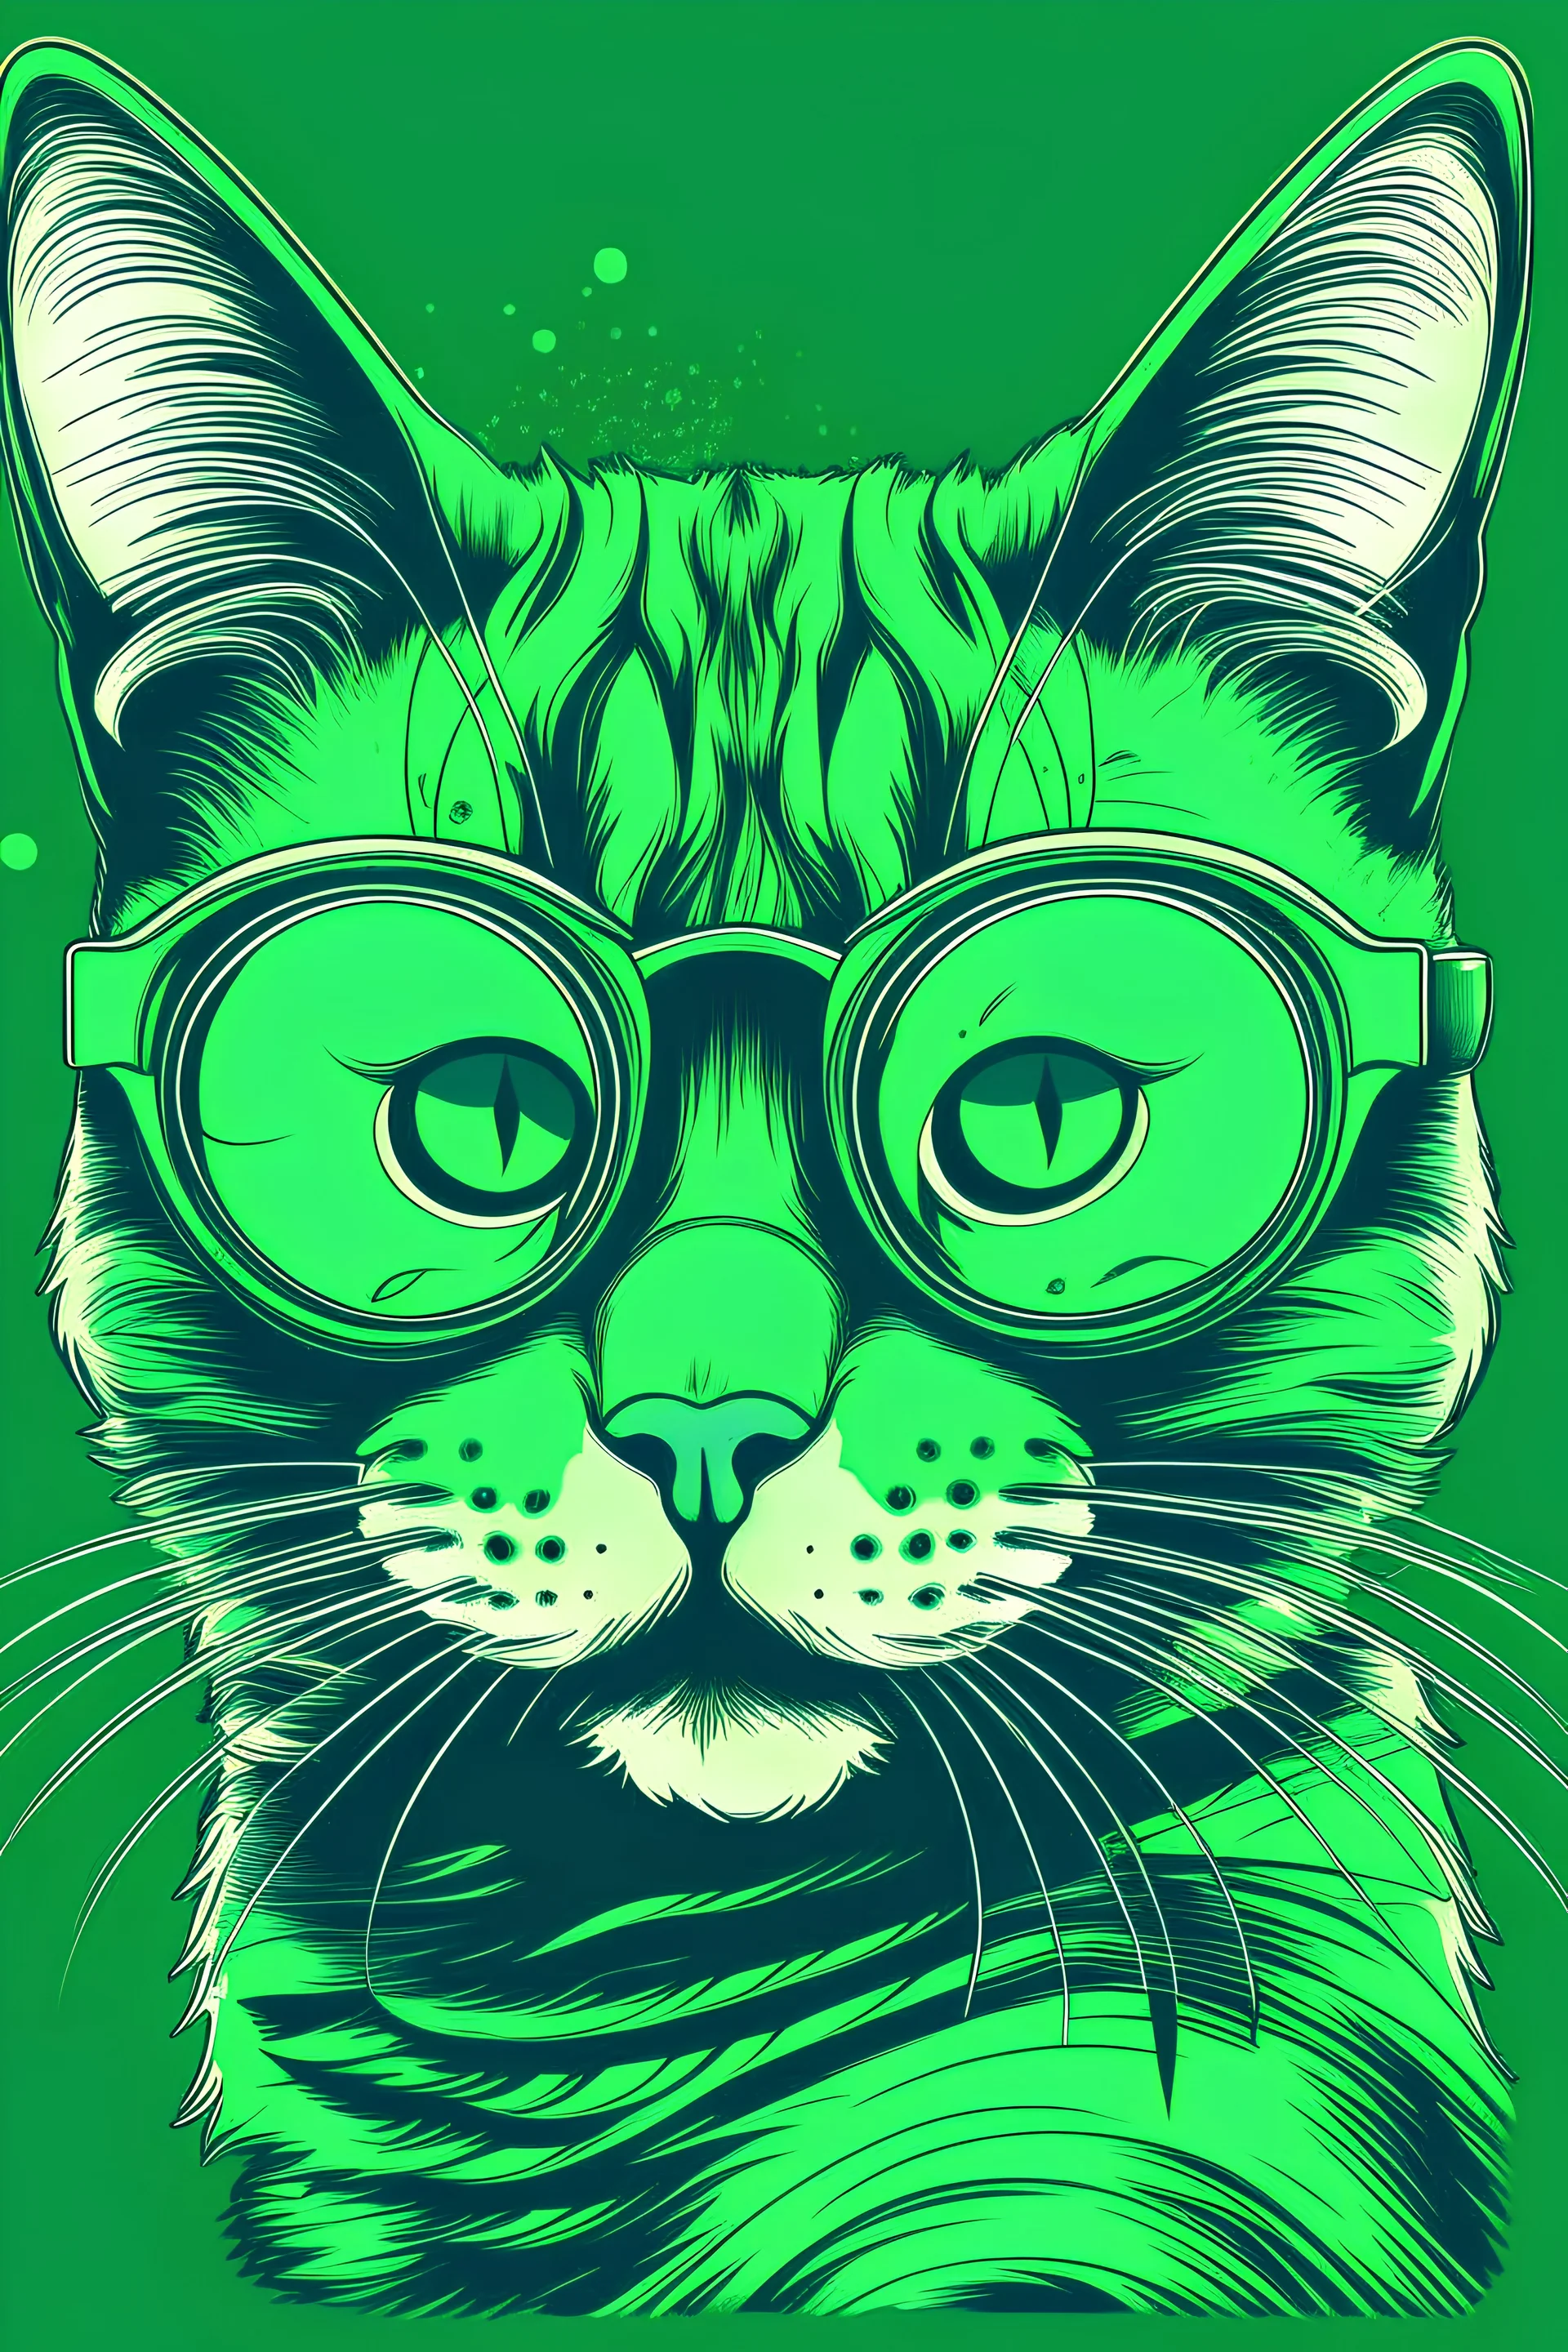 CAT wearing sunglasses, Style: NEW, Mood: Groovy, T-shirt design graphic, vector, contour, GREEN WITH background.